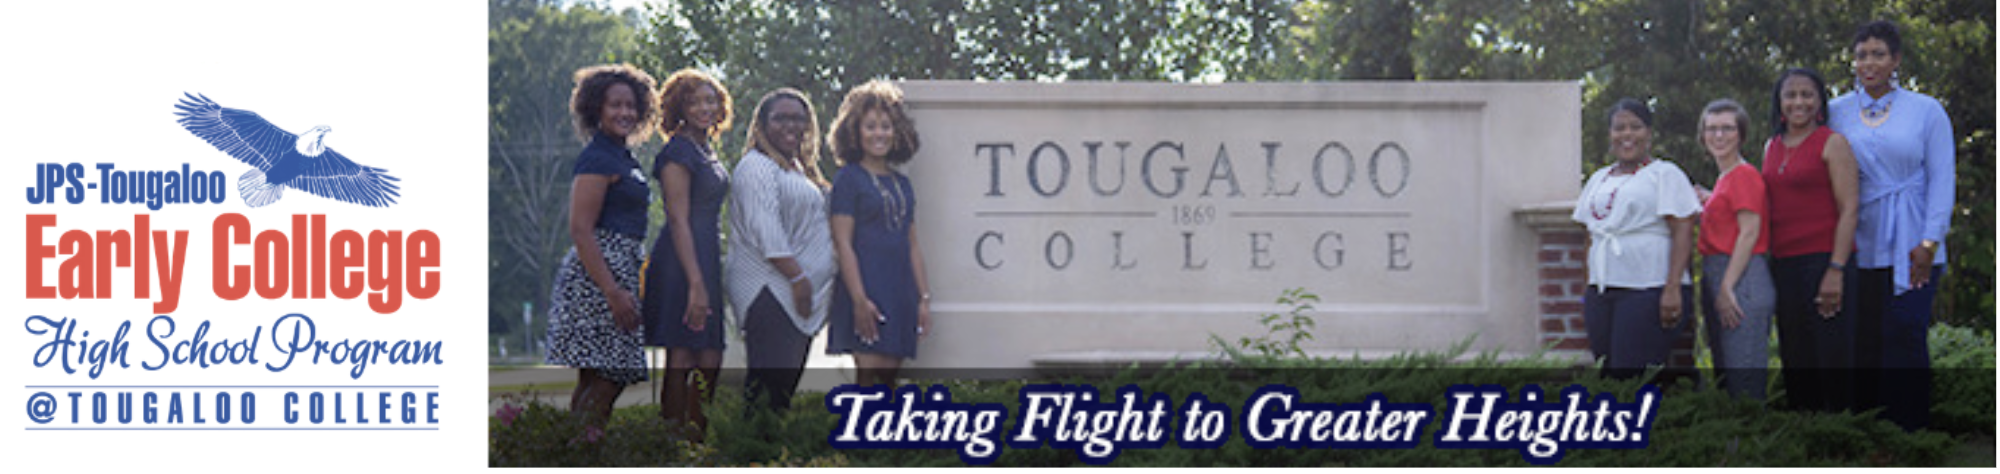 JPS-Tougaloo Early College High School 